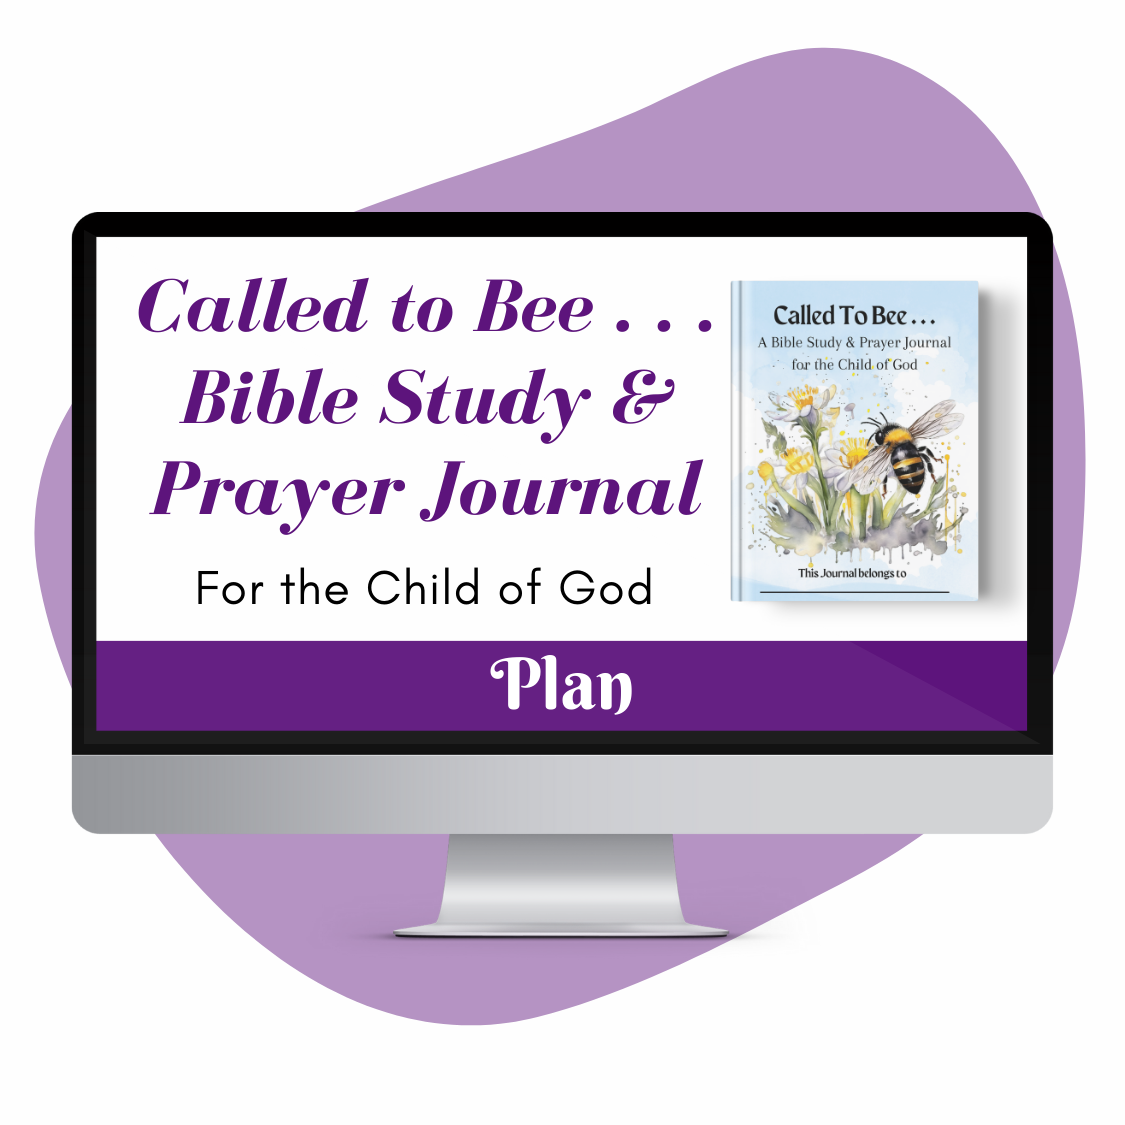 Called to Bee . . . Bible Study Prayer Journal for the Child of God